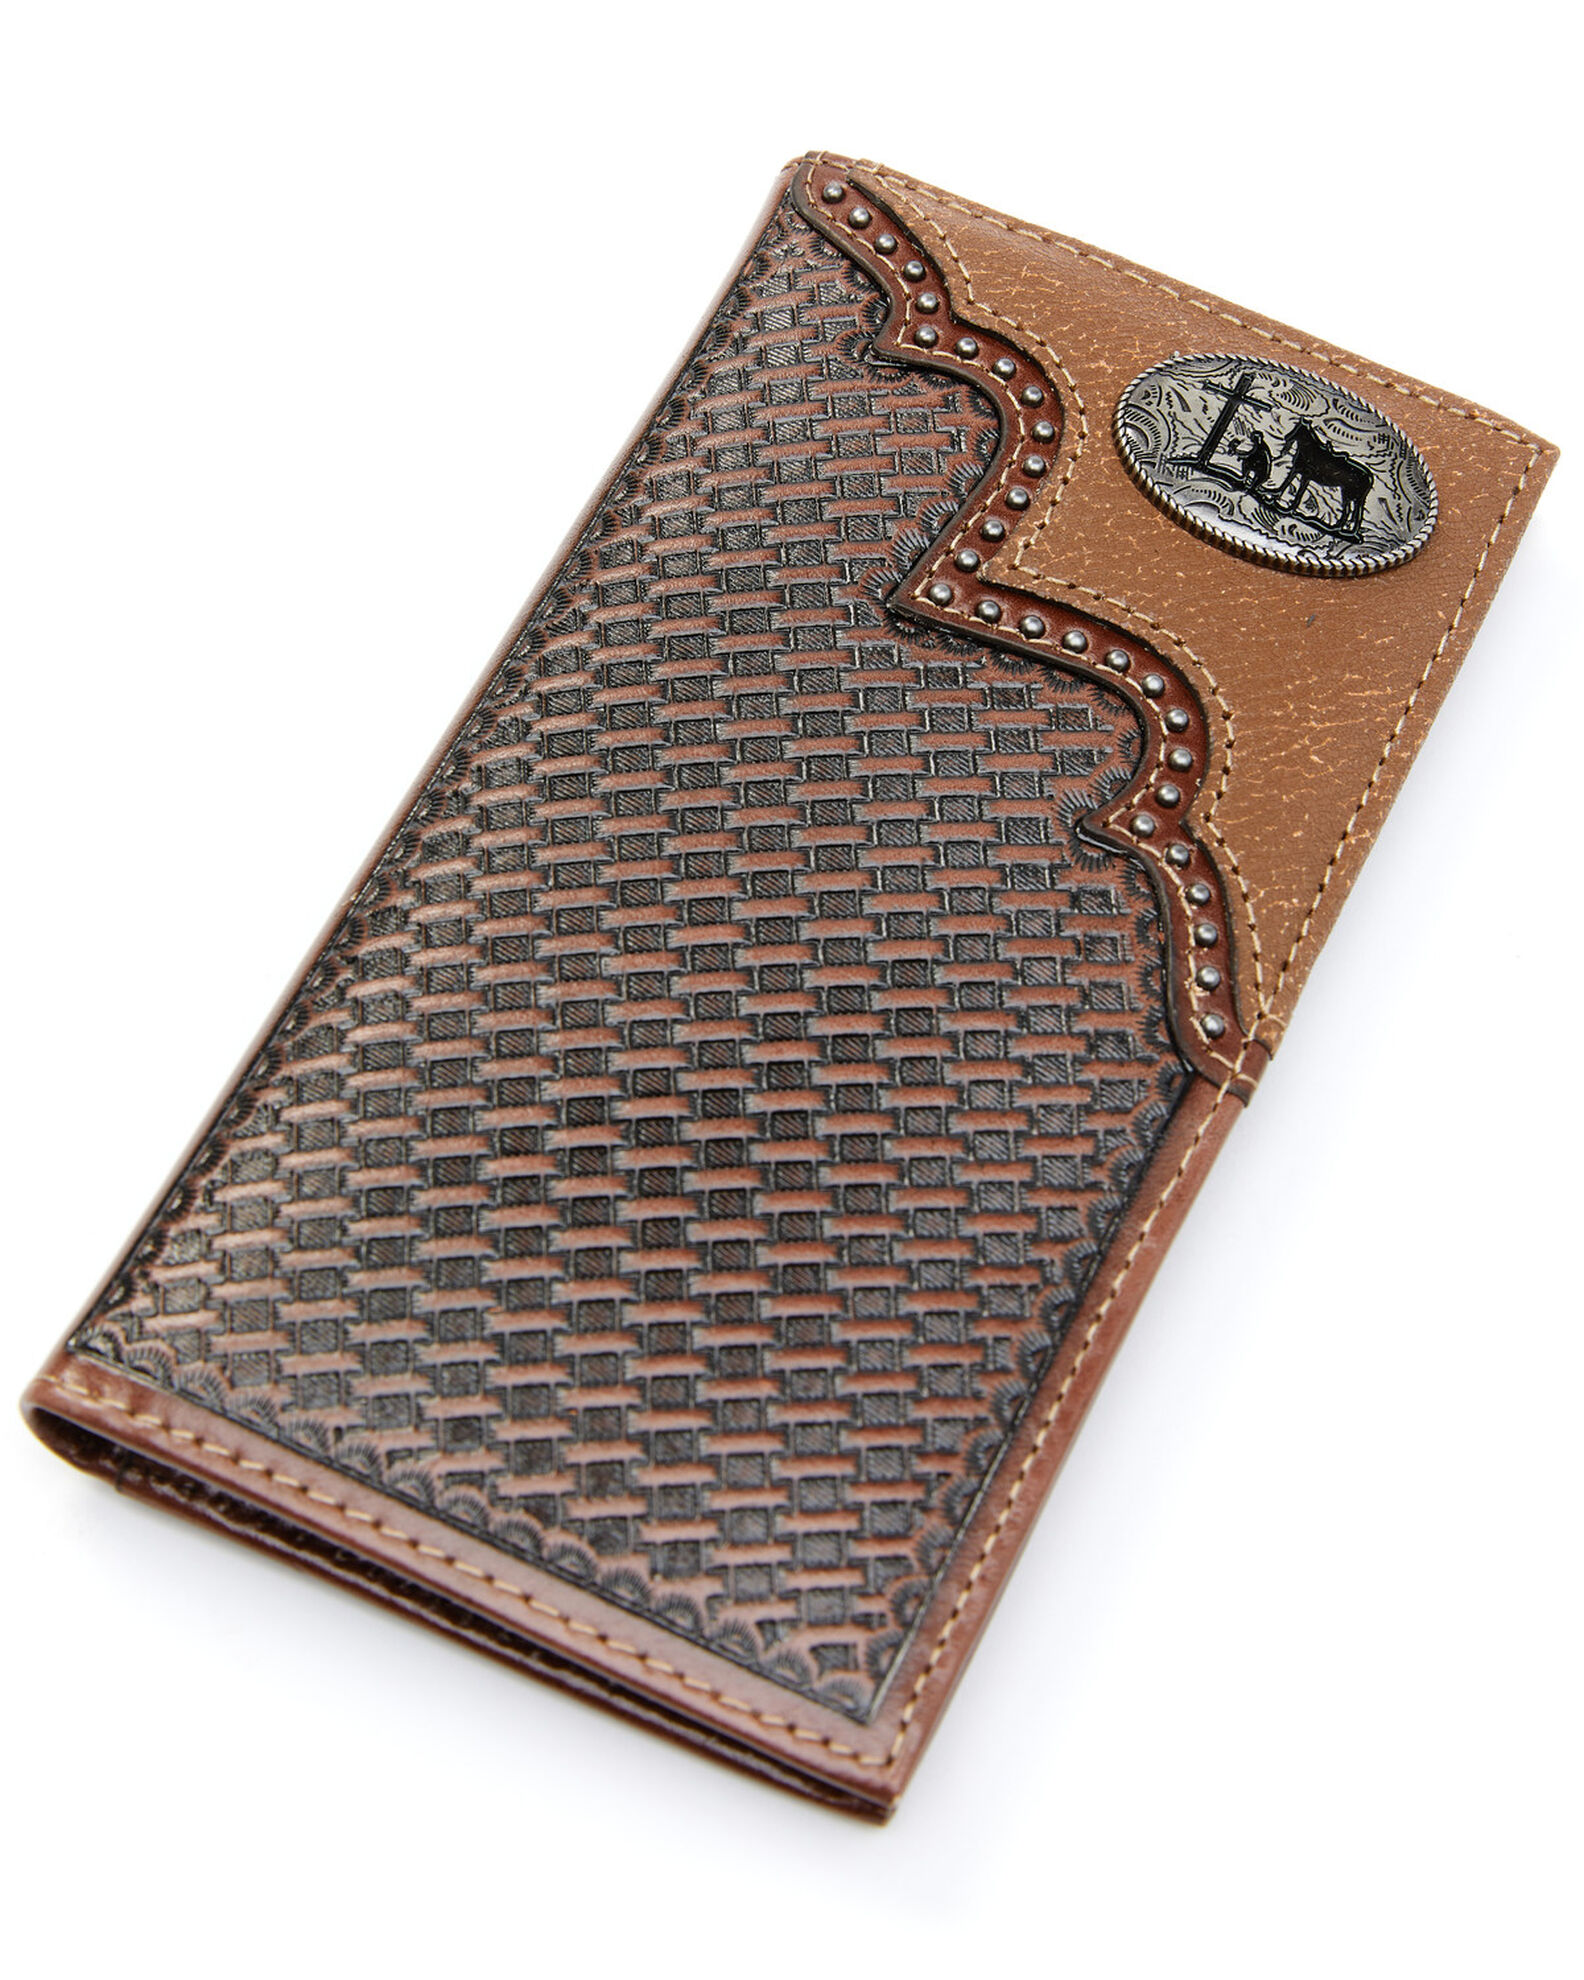 Men's Western Leather Wallets, Rodeo, Cowboy